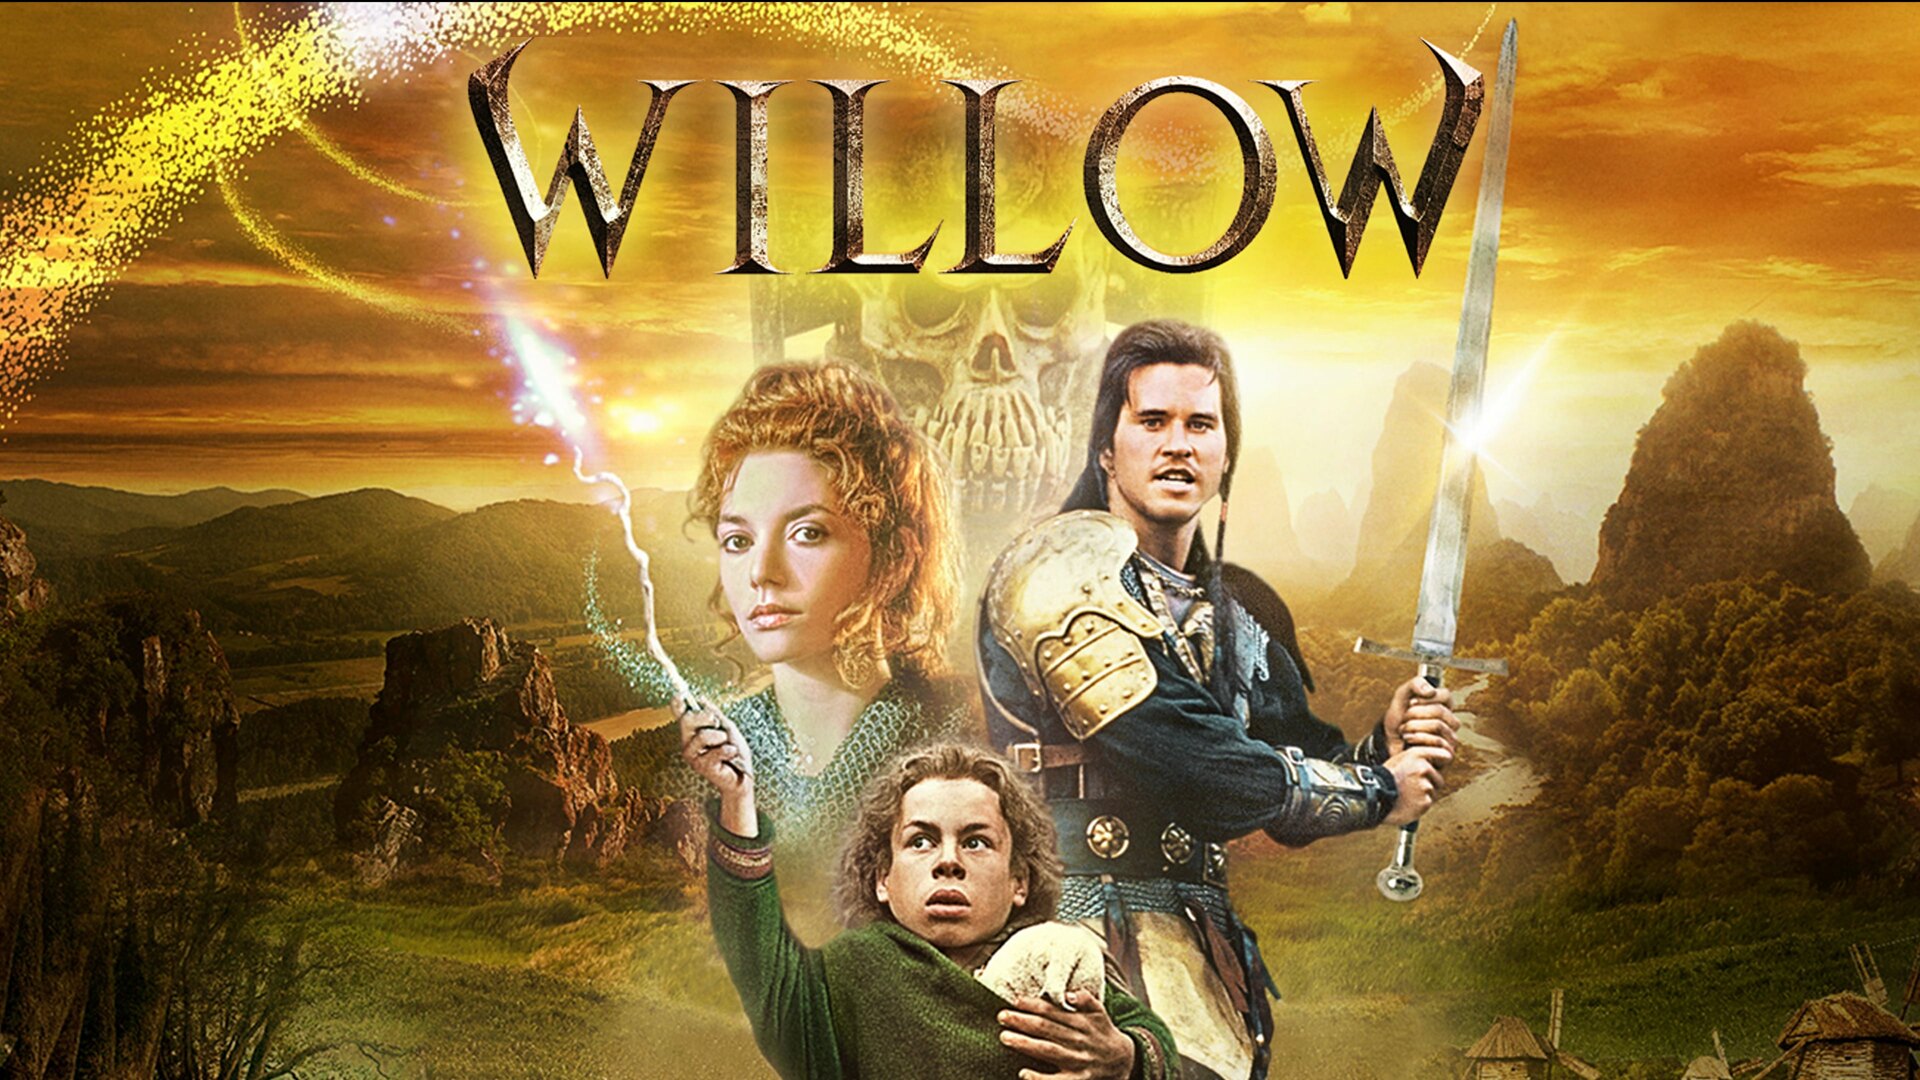 Sesso willow Willow sesso